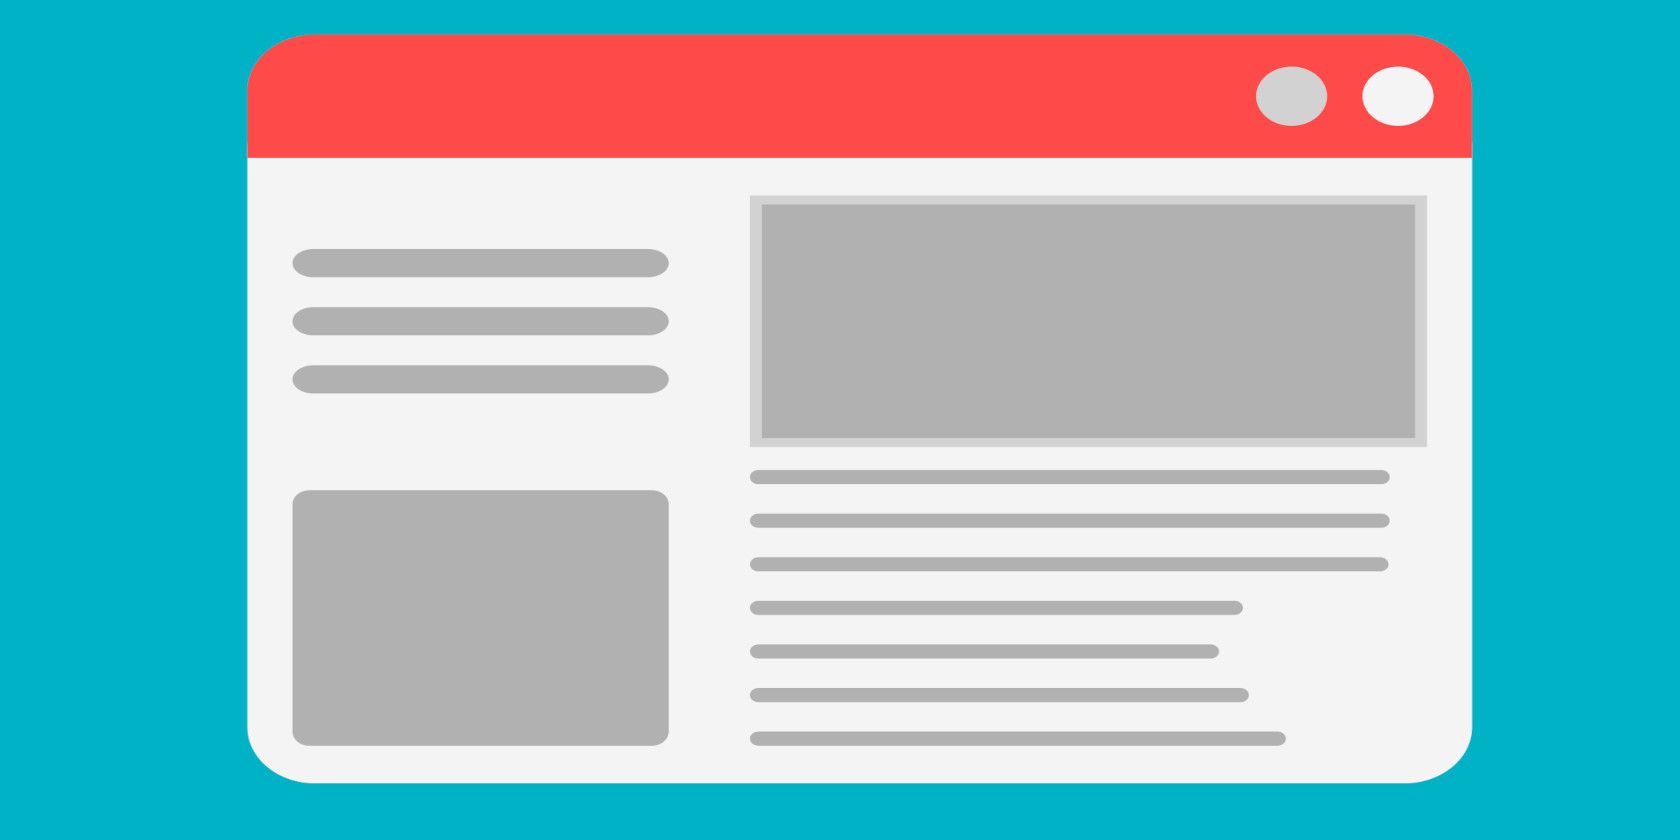 A wireframe illustration of a webpage